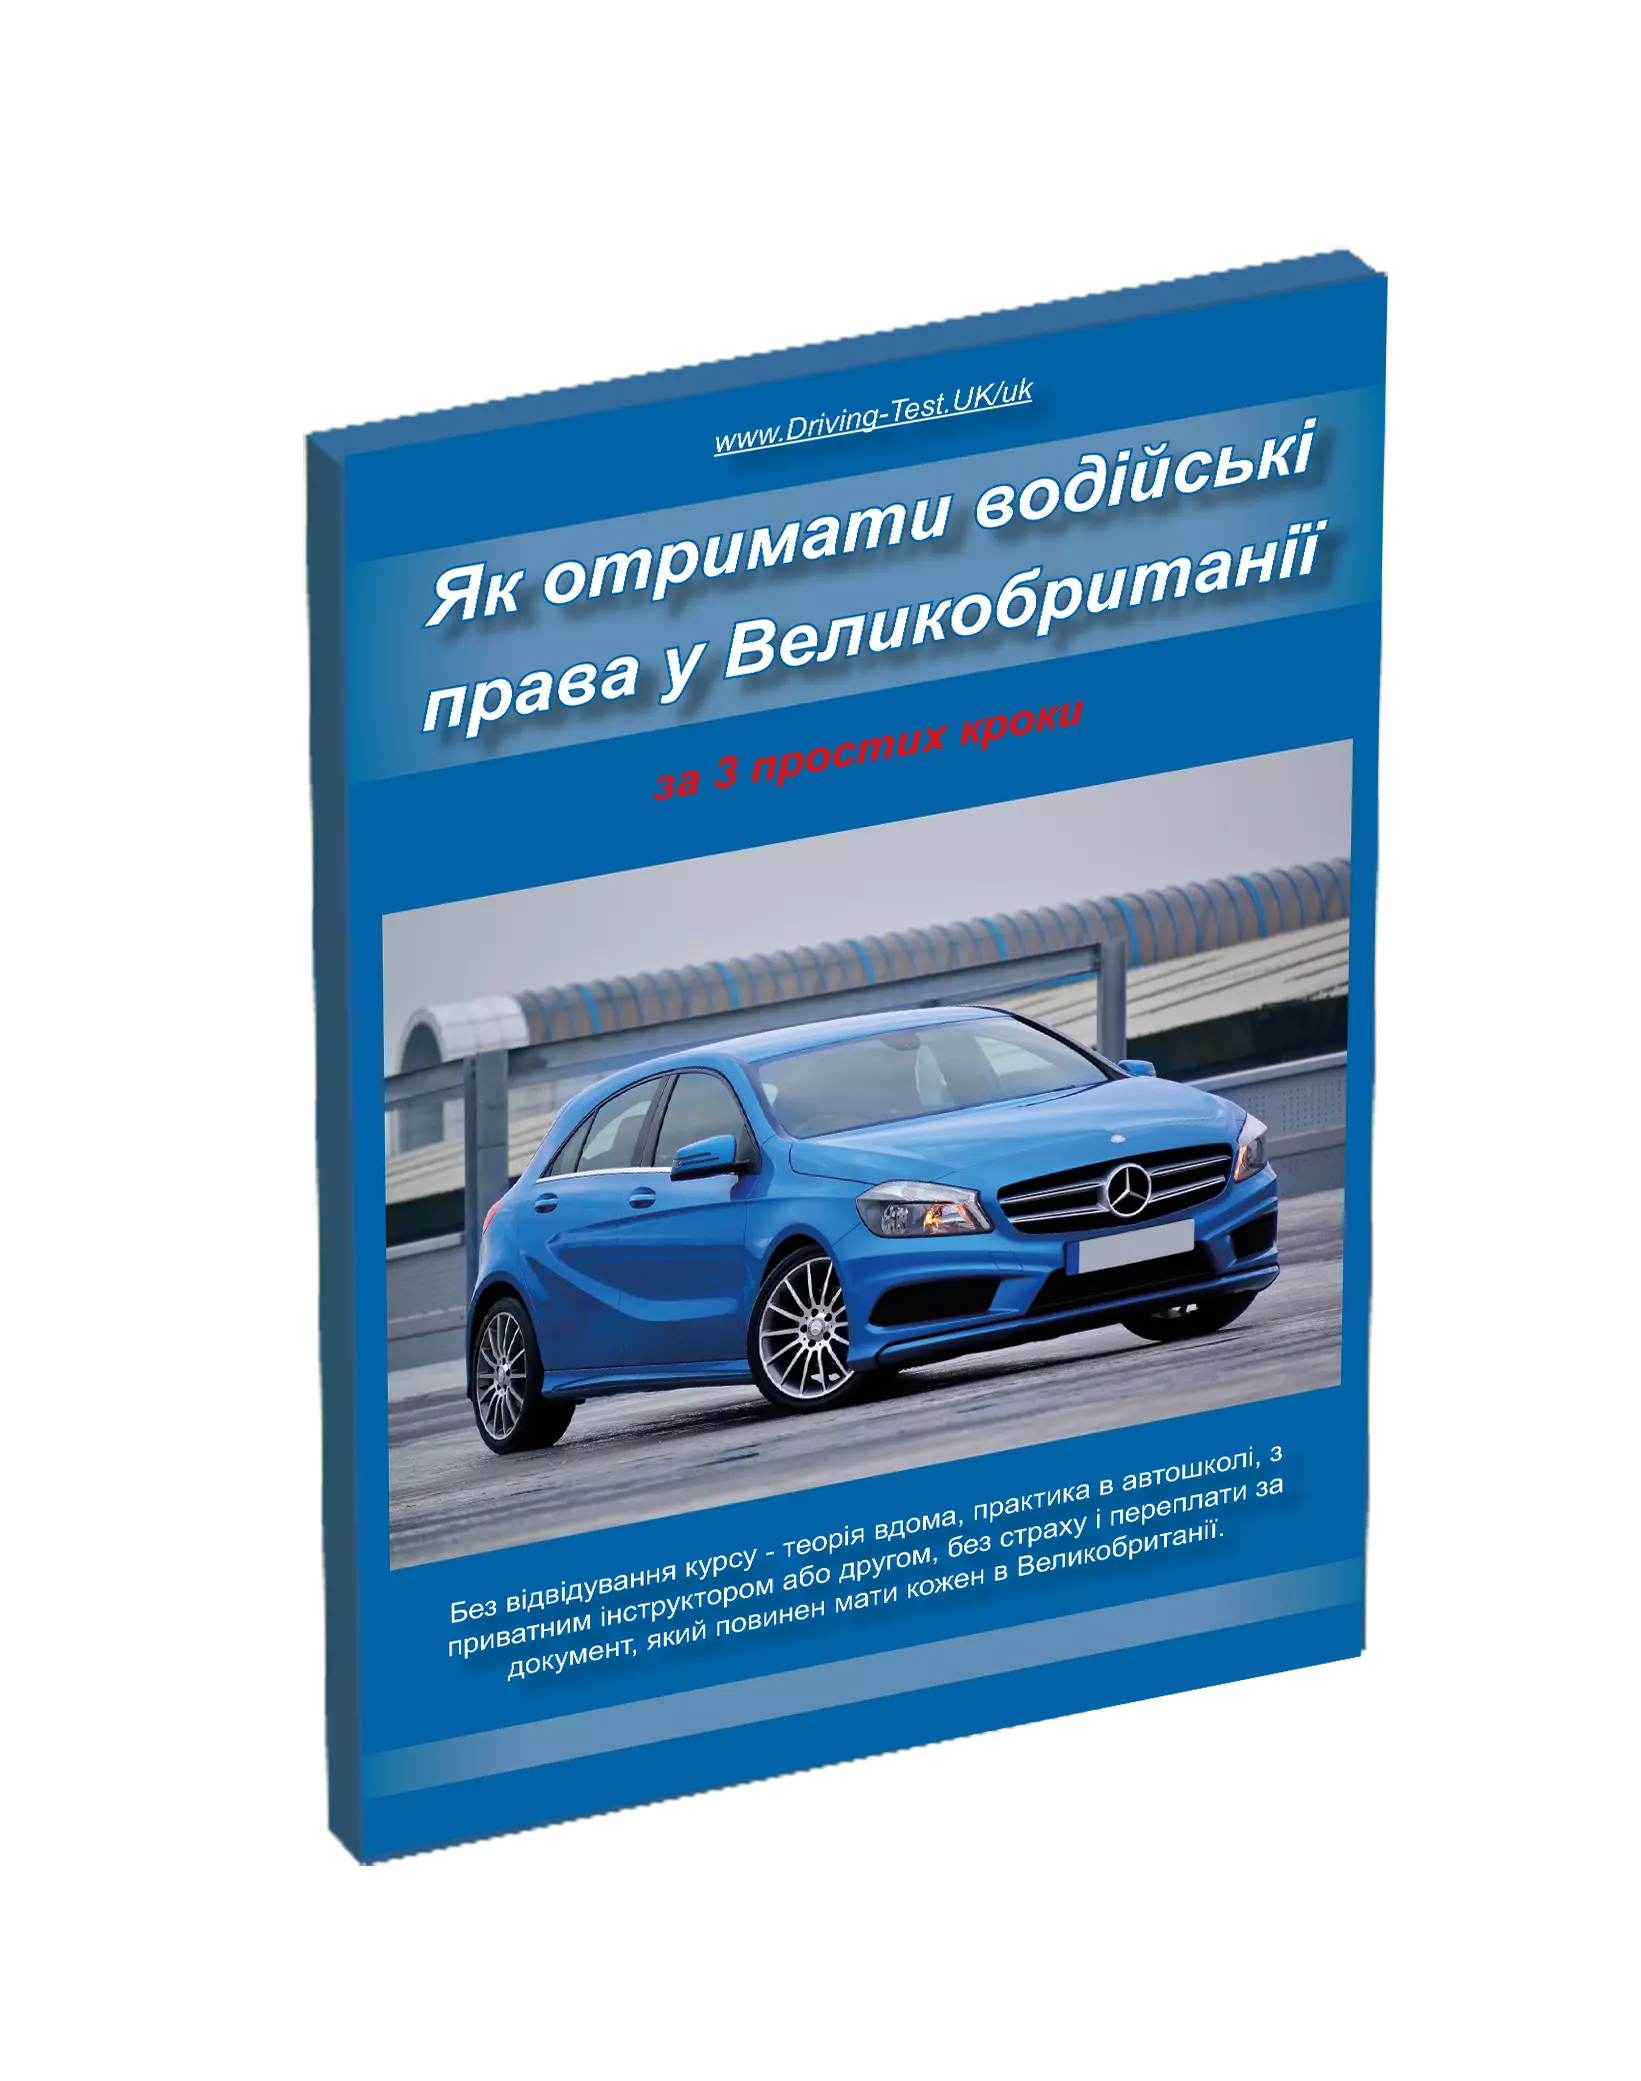 How to get a driving licence in the UK in 3 easy steps in ukrainian language